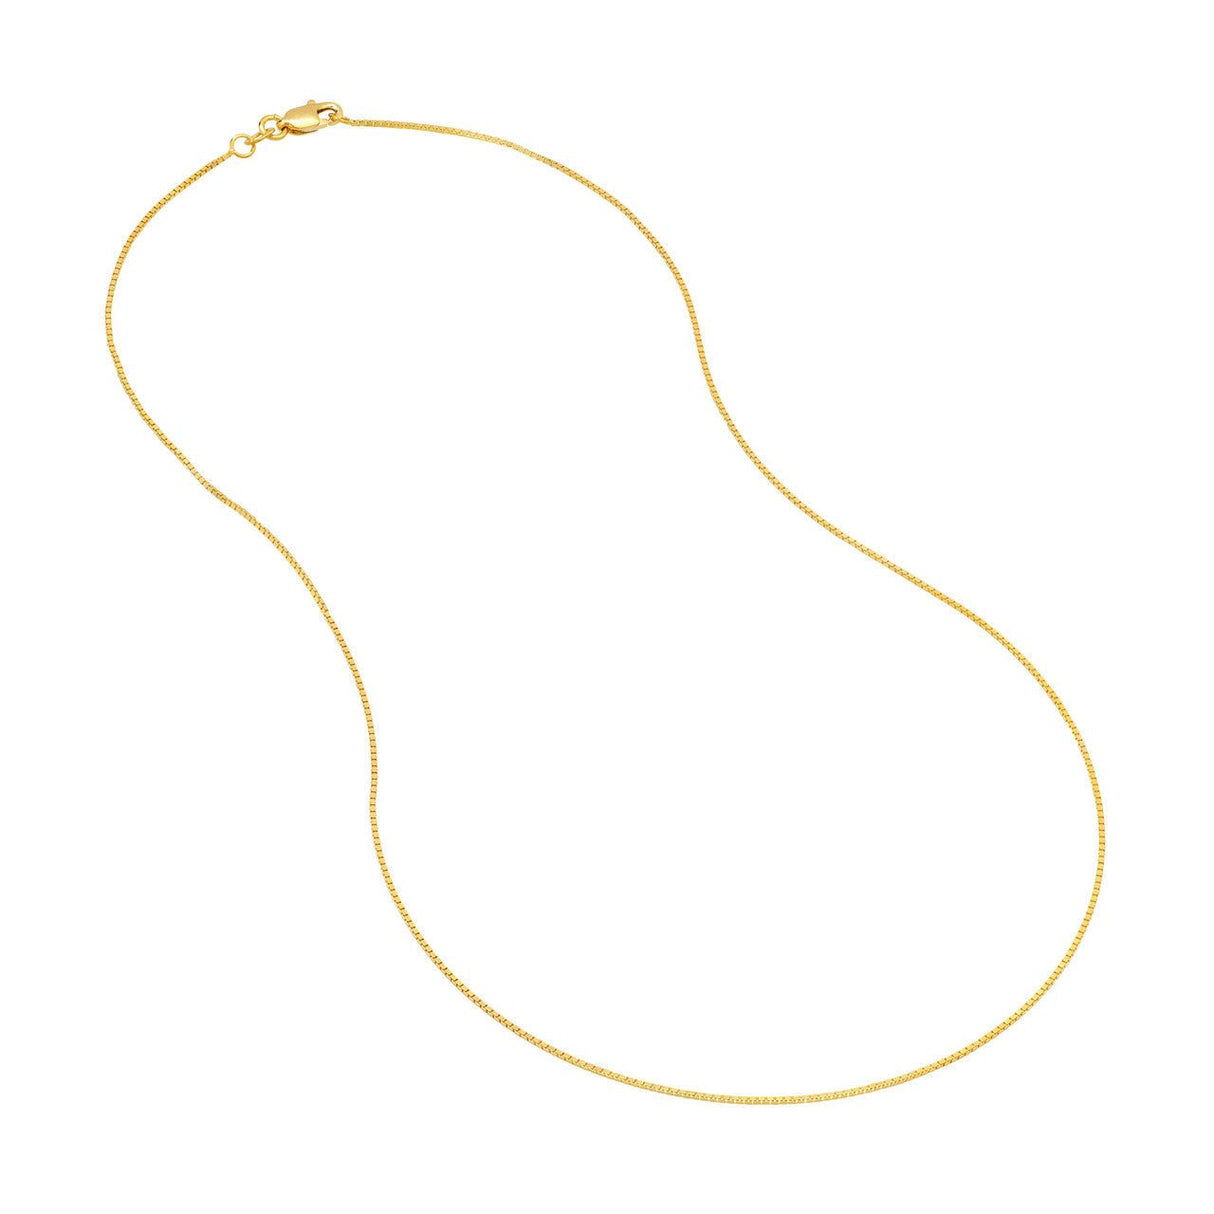 14K Gold Chain, 24", 0.73mm Box Chain with Lobster Lock, Gold Layered Chain, Gold Necklaces, - Diamond Origin